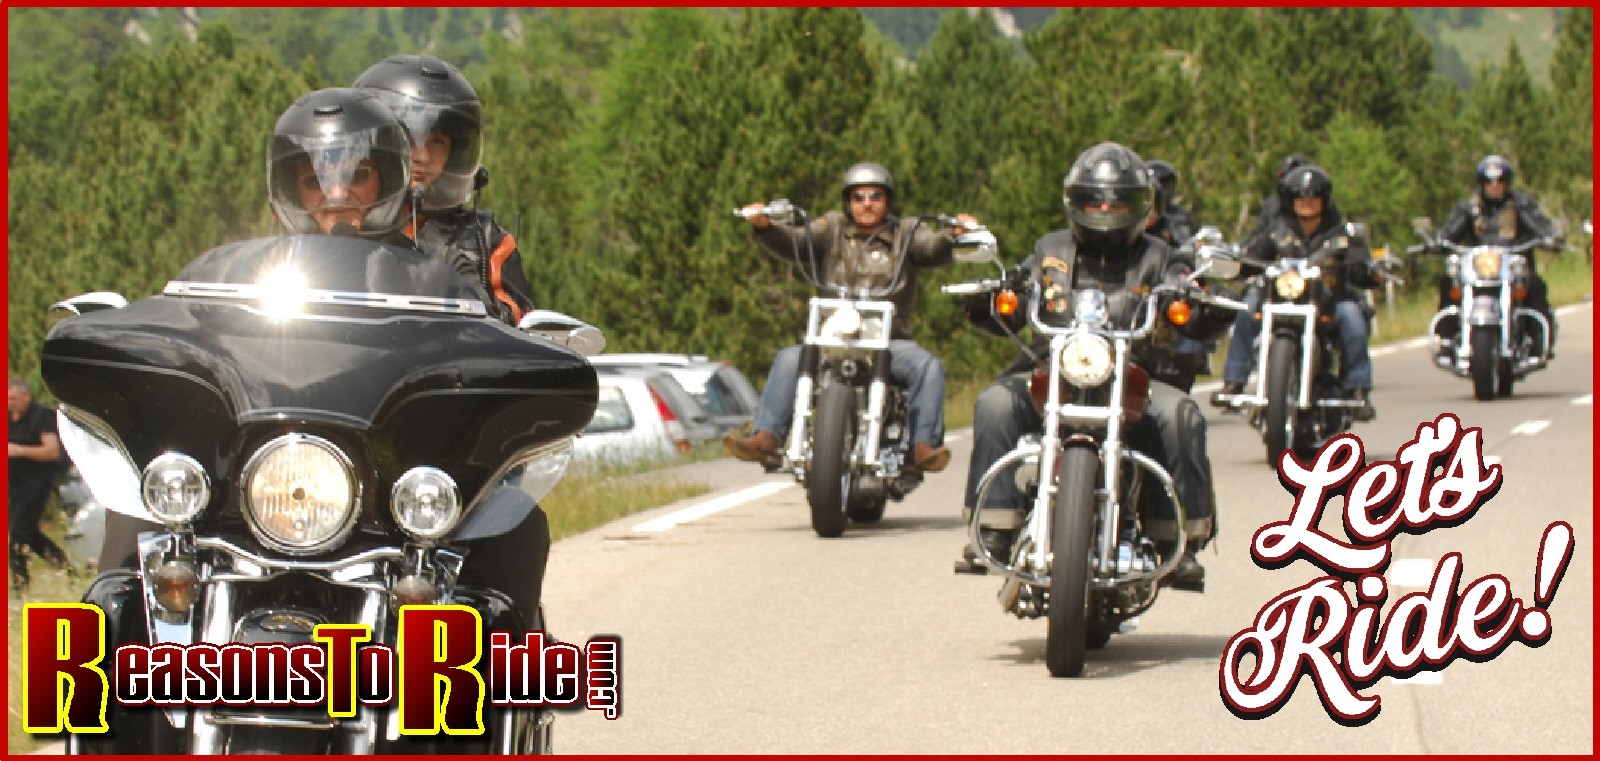 Motorcycle Riding Groups In Ohio Reviewmotors co